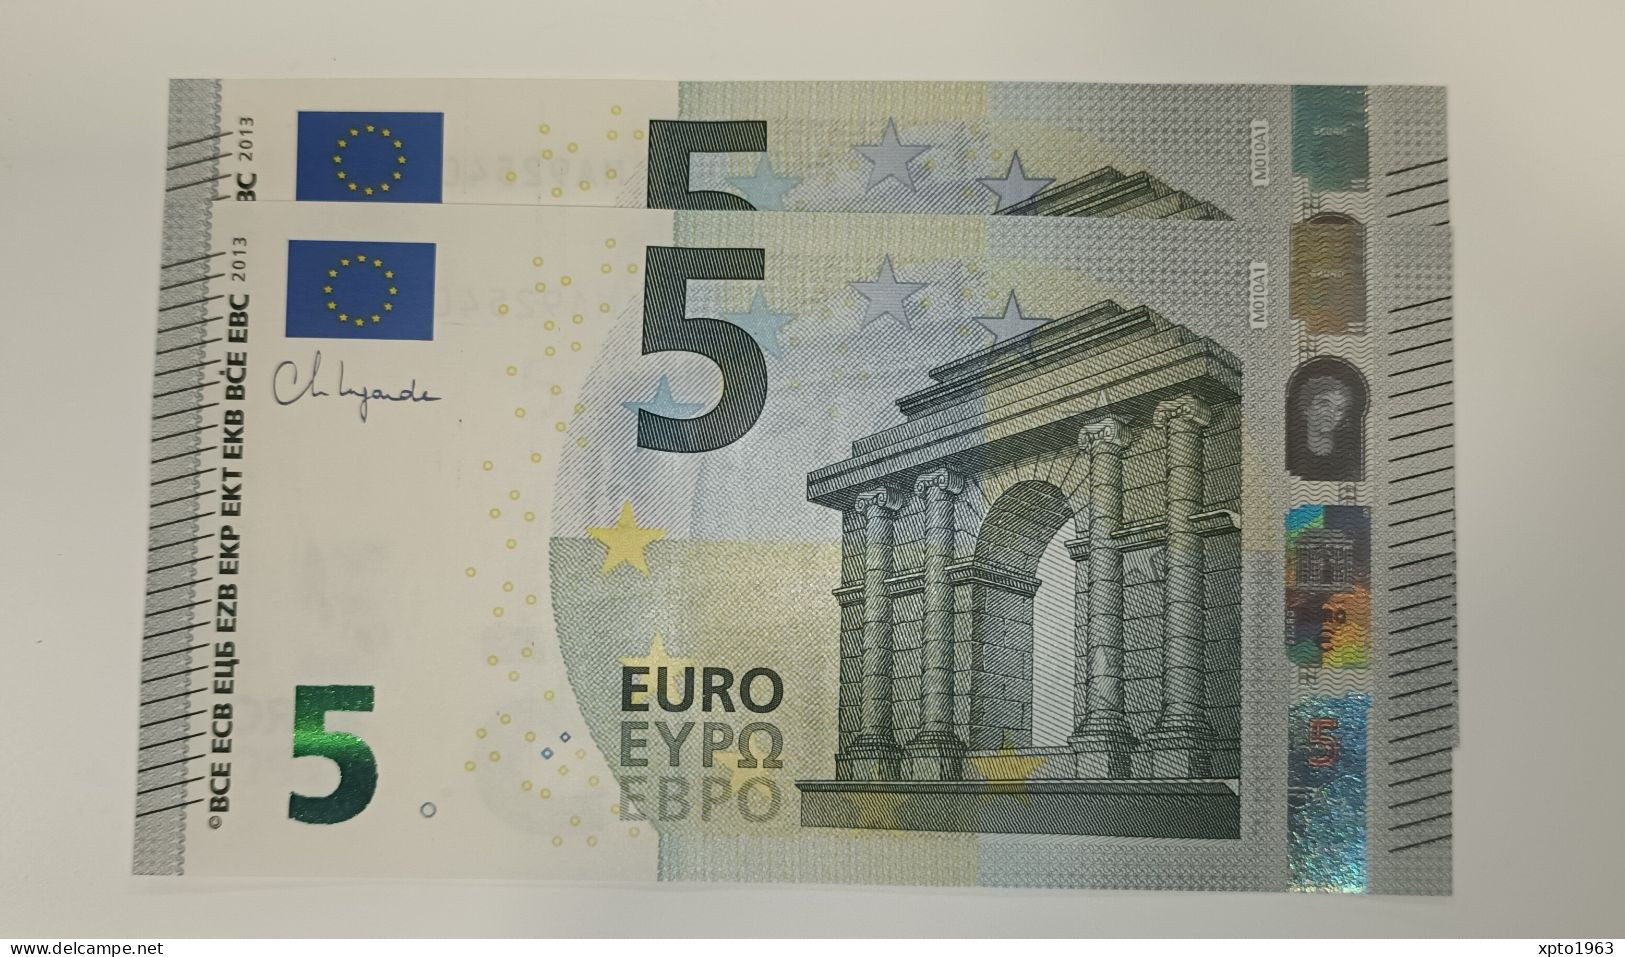 2X 5 EURO M010 A1 PORTUGAL - Serial Number - MA9254078129 / MA9254078138 - UNC FDS NEUF - 5 Euro